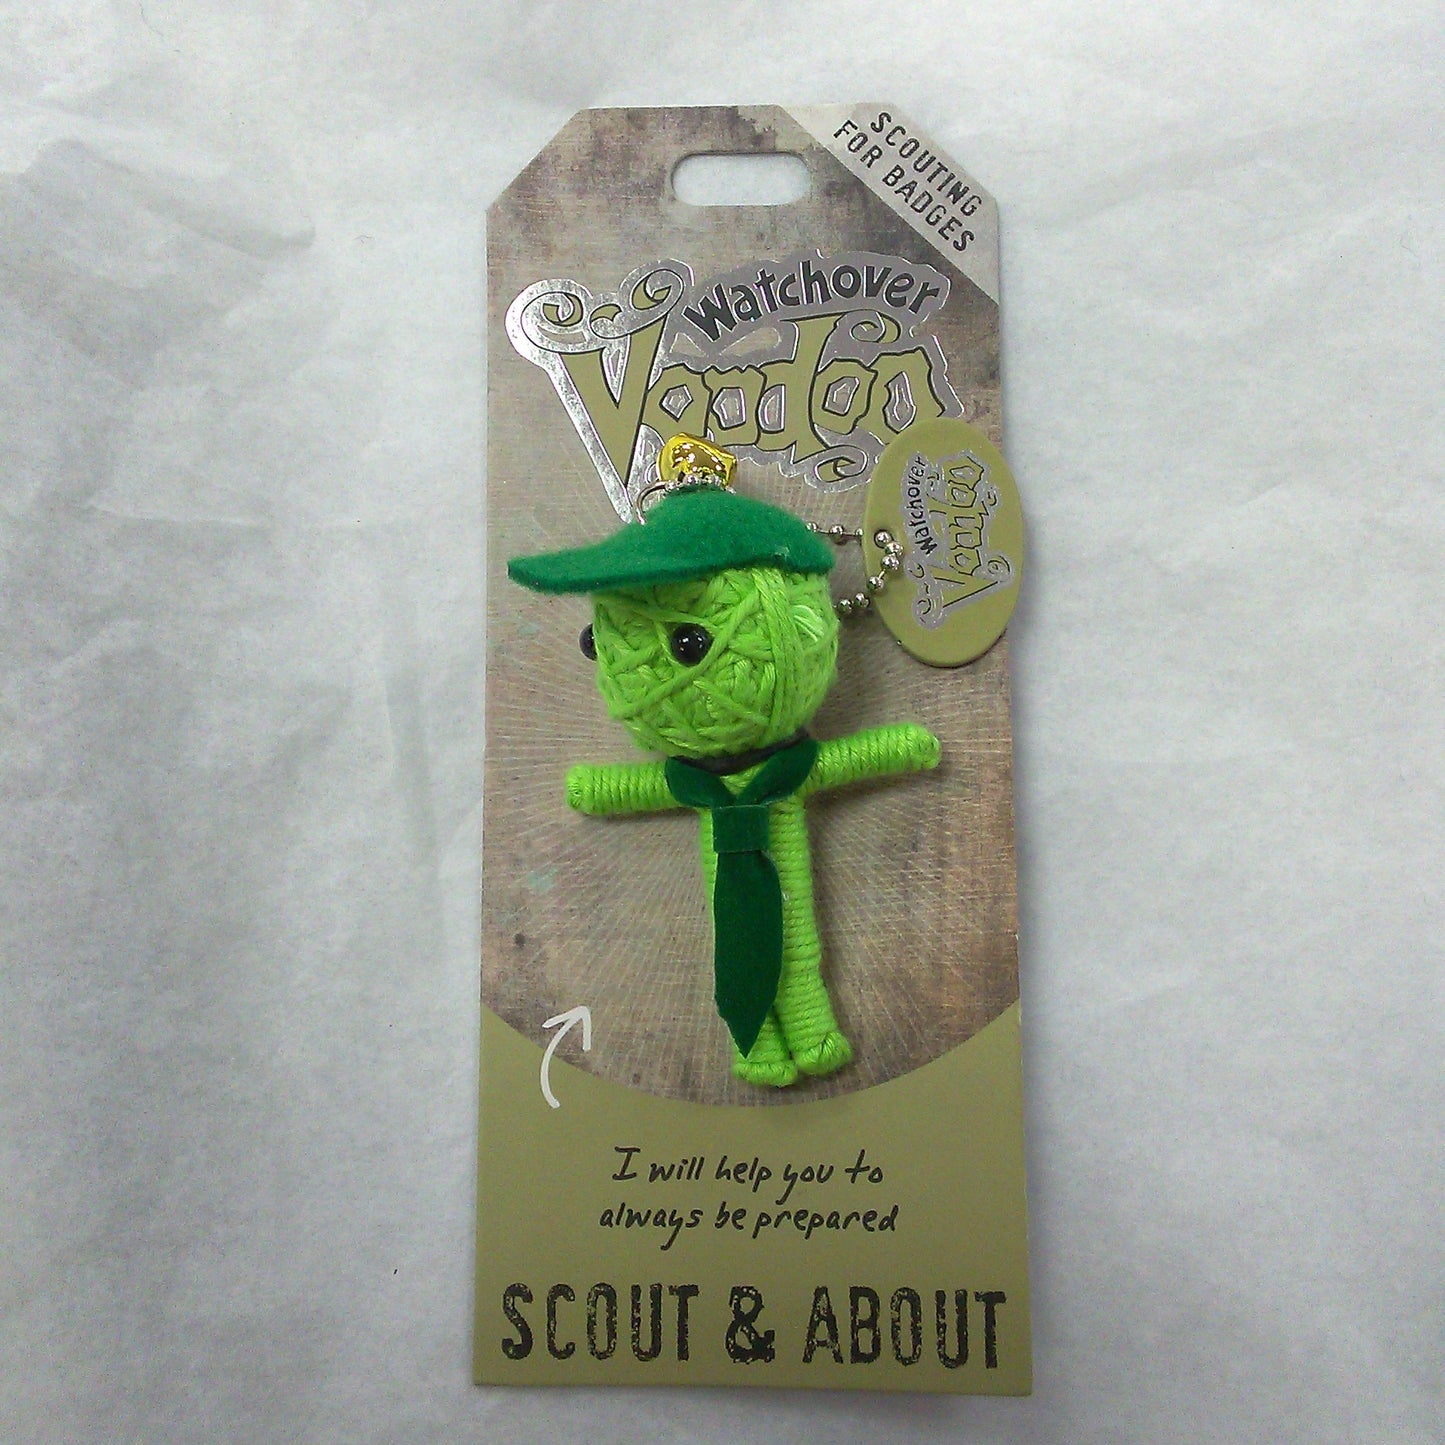 Voodoo Keychain - Scout & About